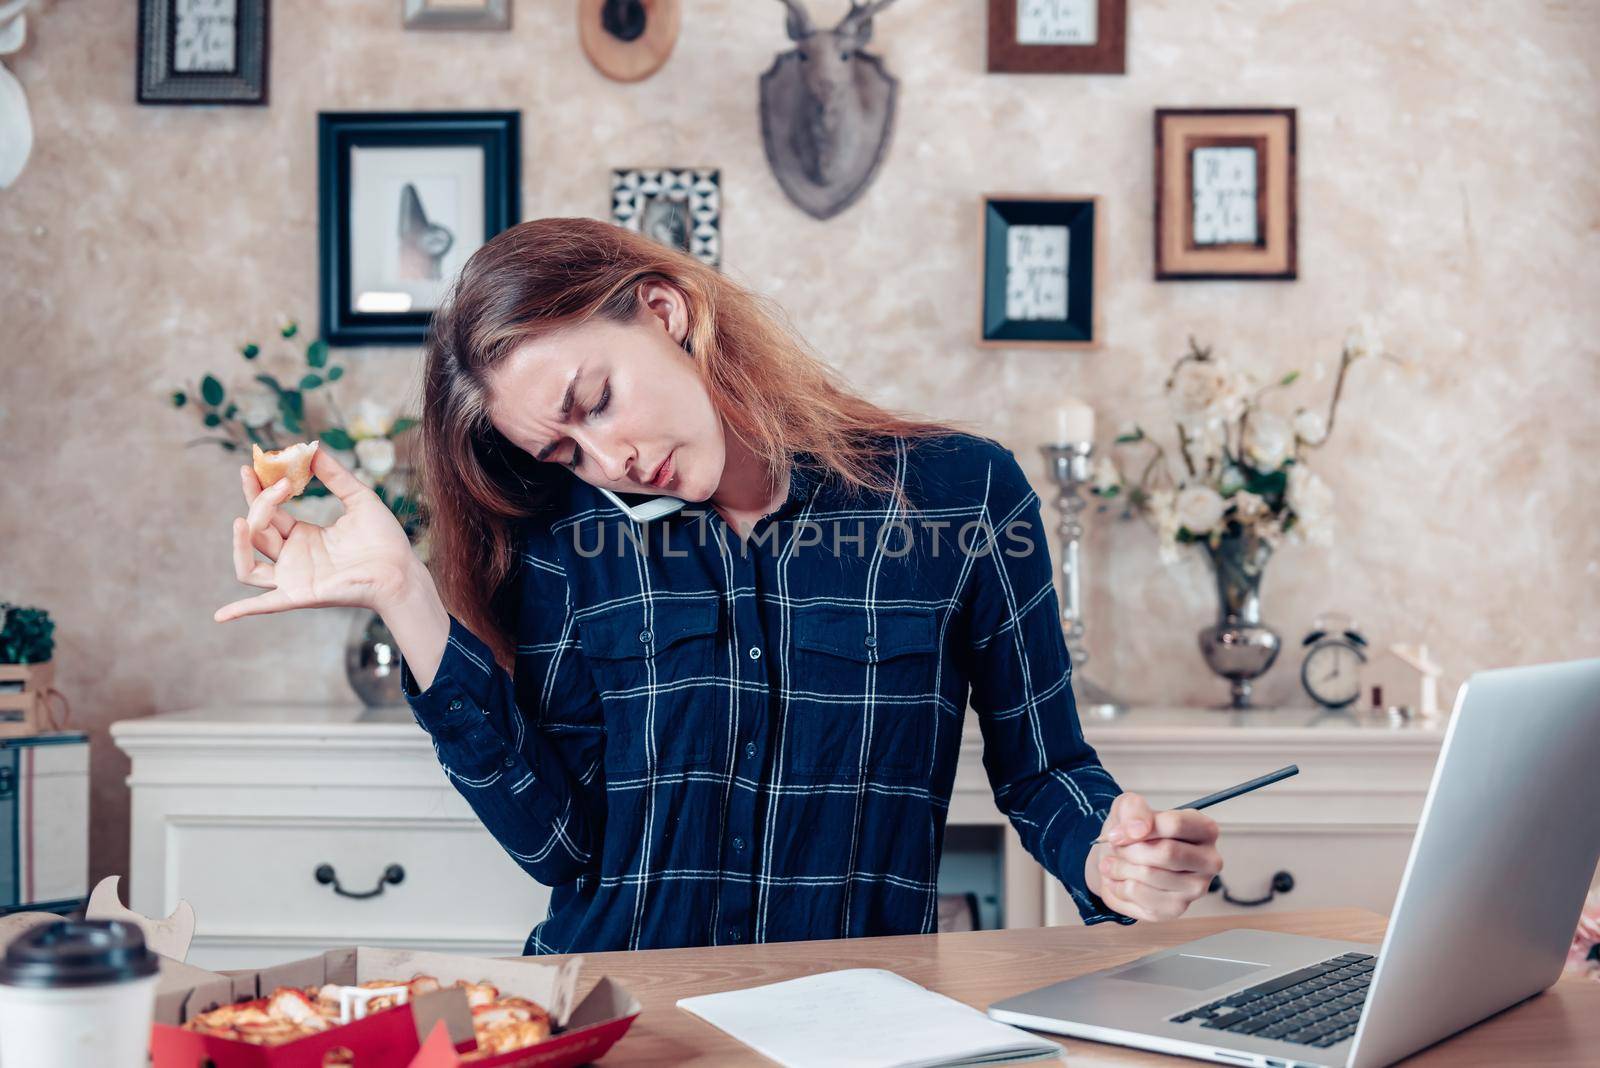 Busy Businesswoman Work at Home While Working on Table Desk With Laptop at The Same Time She Eating, Business Woman Entrepreneur Work From Home With Serious Communicating Busy Tasking. Work Lifestyles